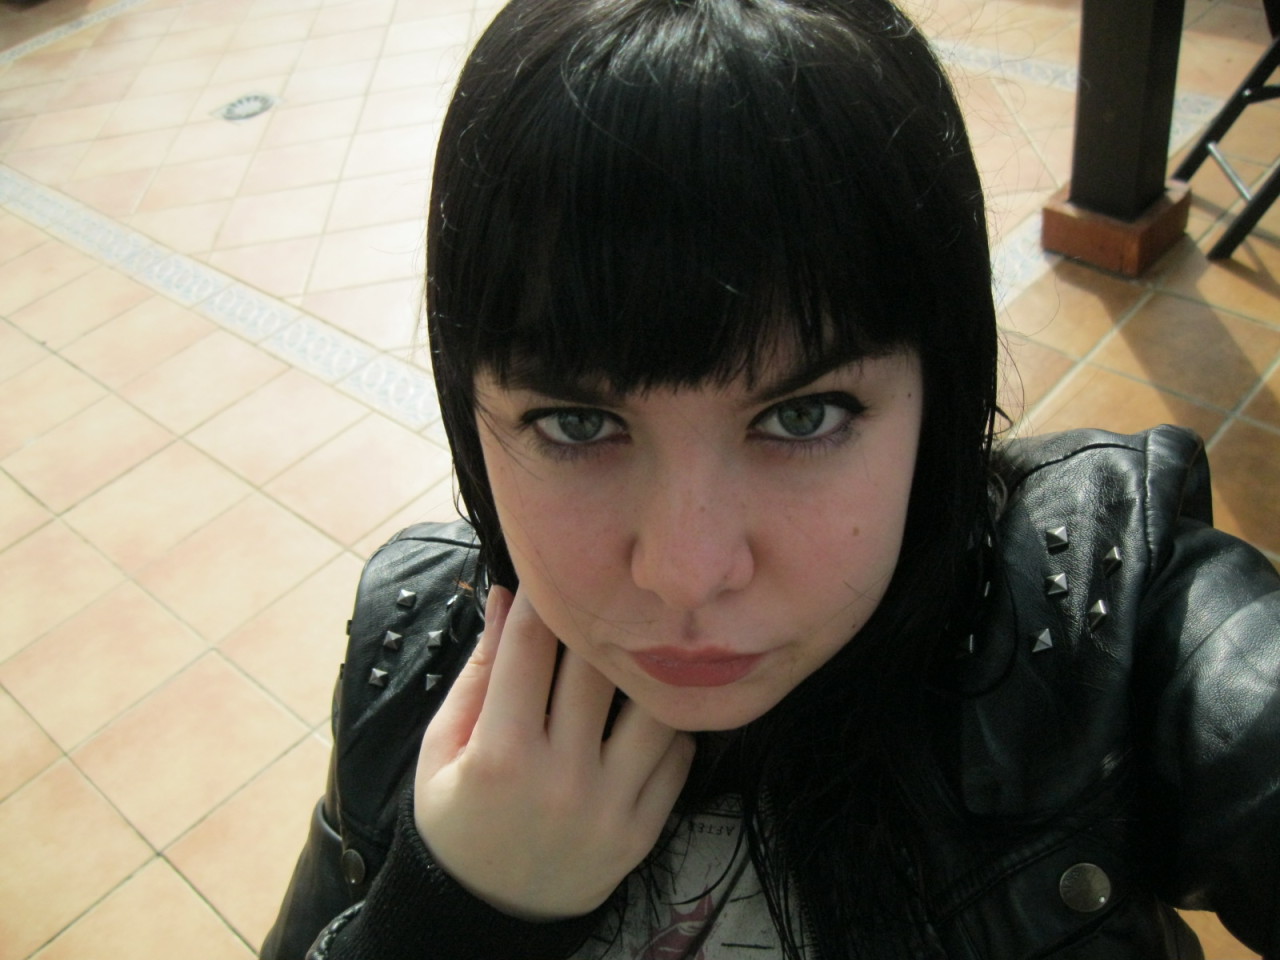 Long time ago since the last time I posted photos of myself (ι´Д｀)ﾉ  I like